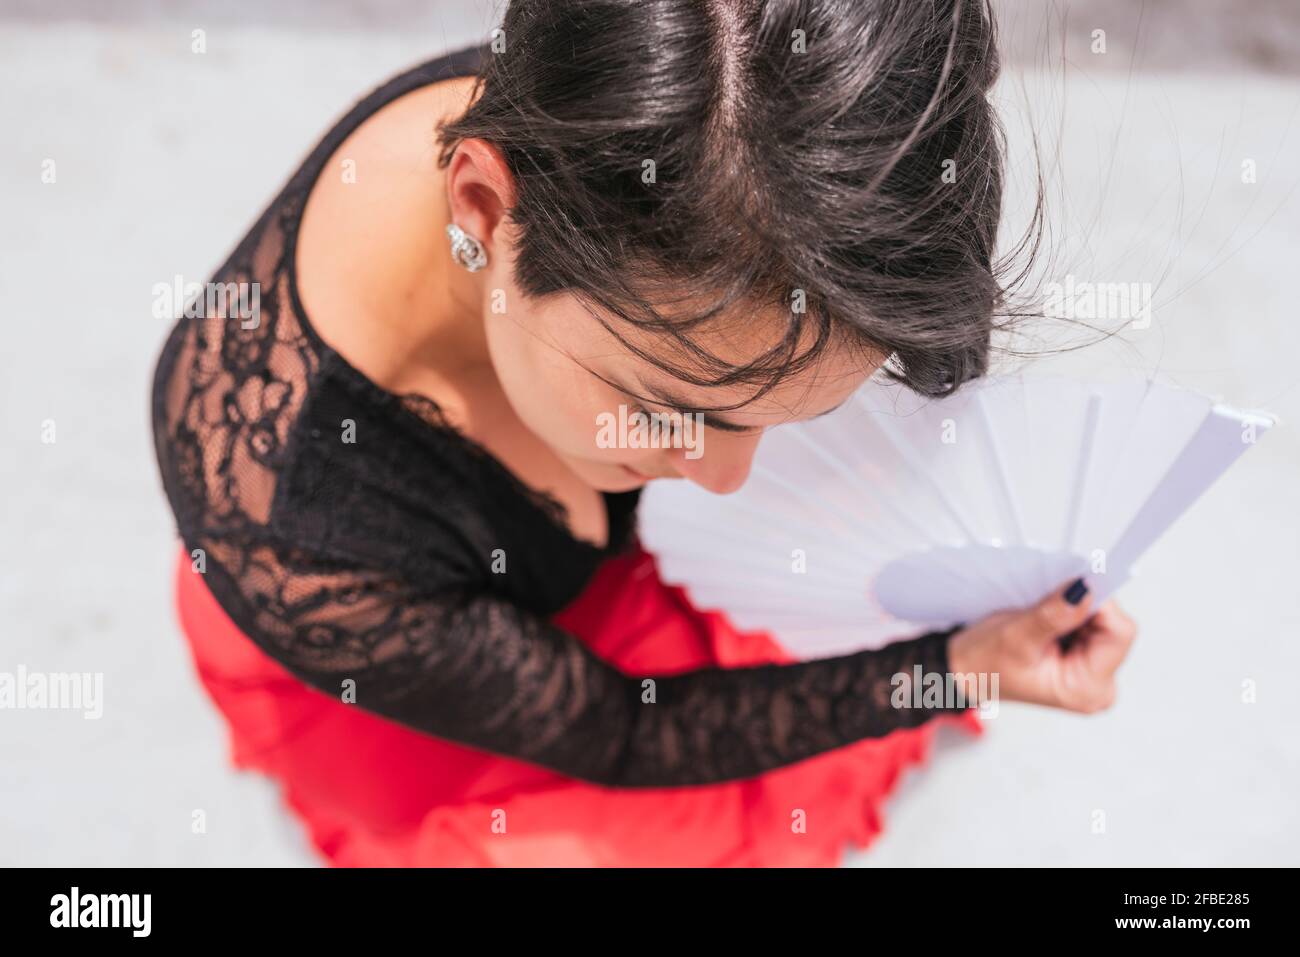 Female flamenco dancer with hand fan practicing dance Stock Photo